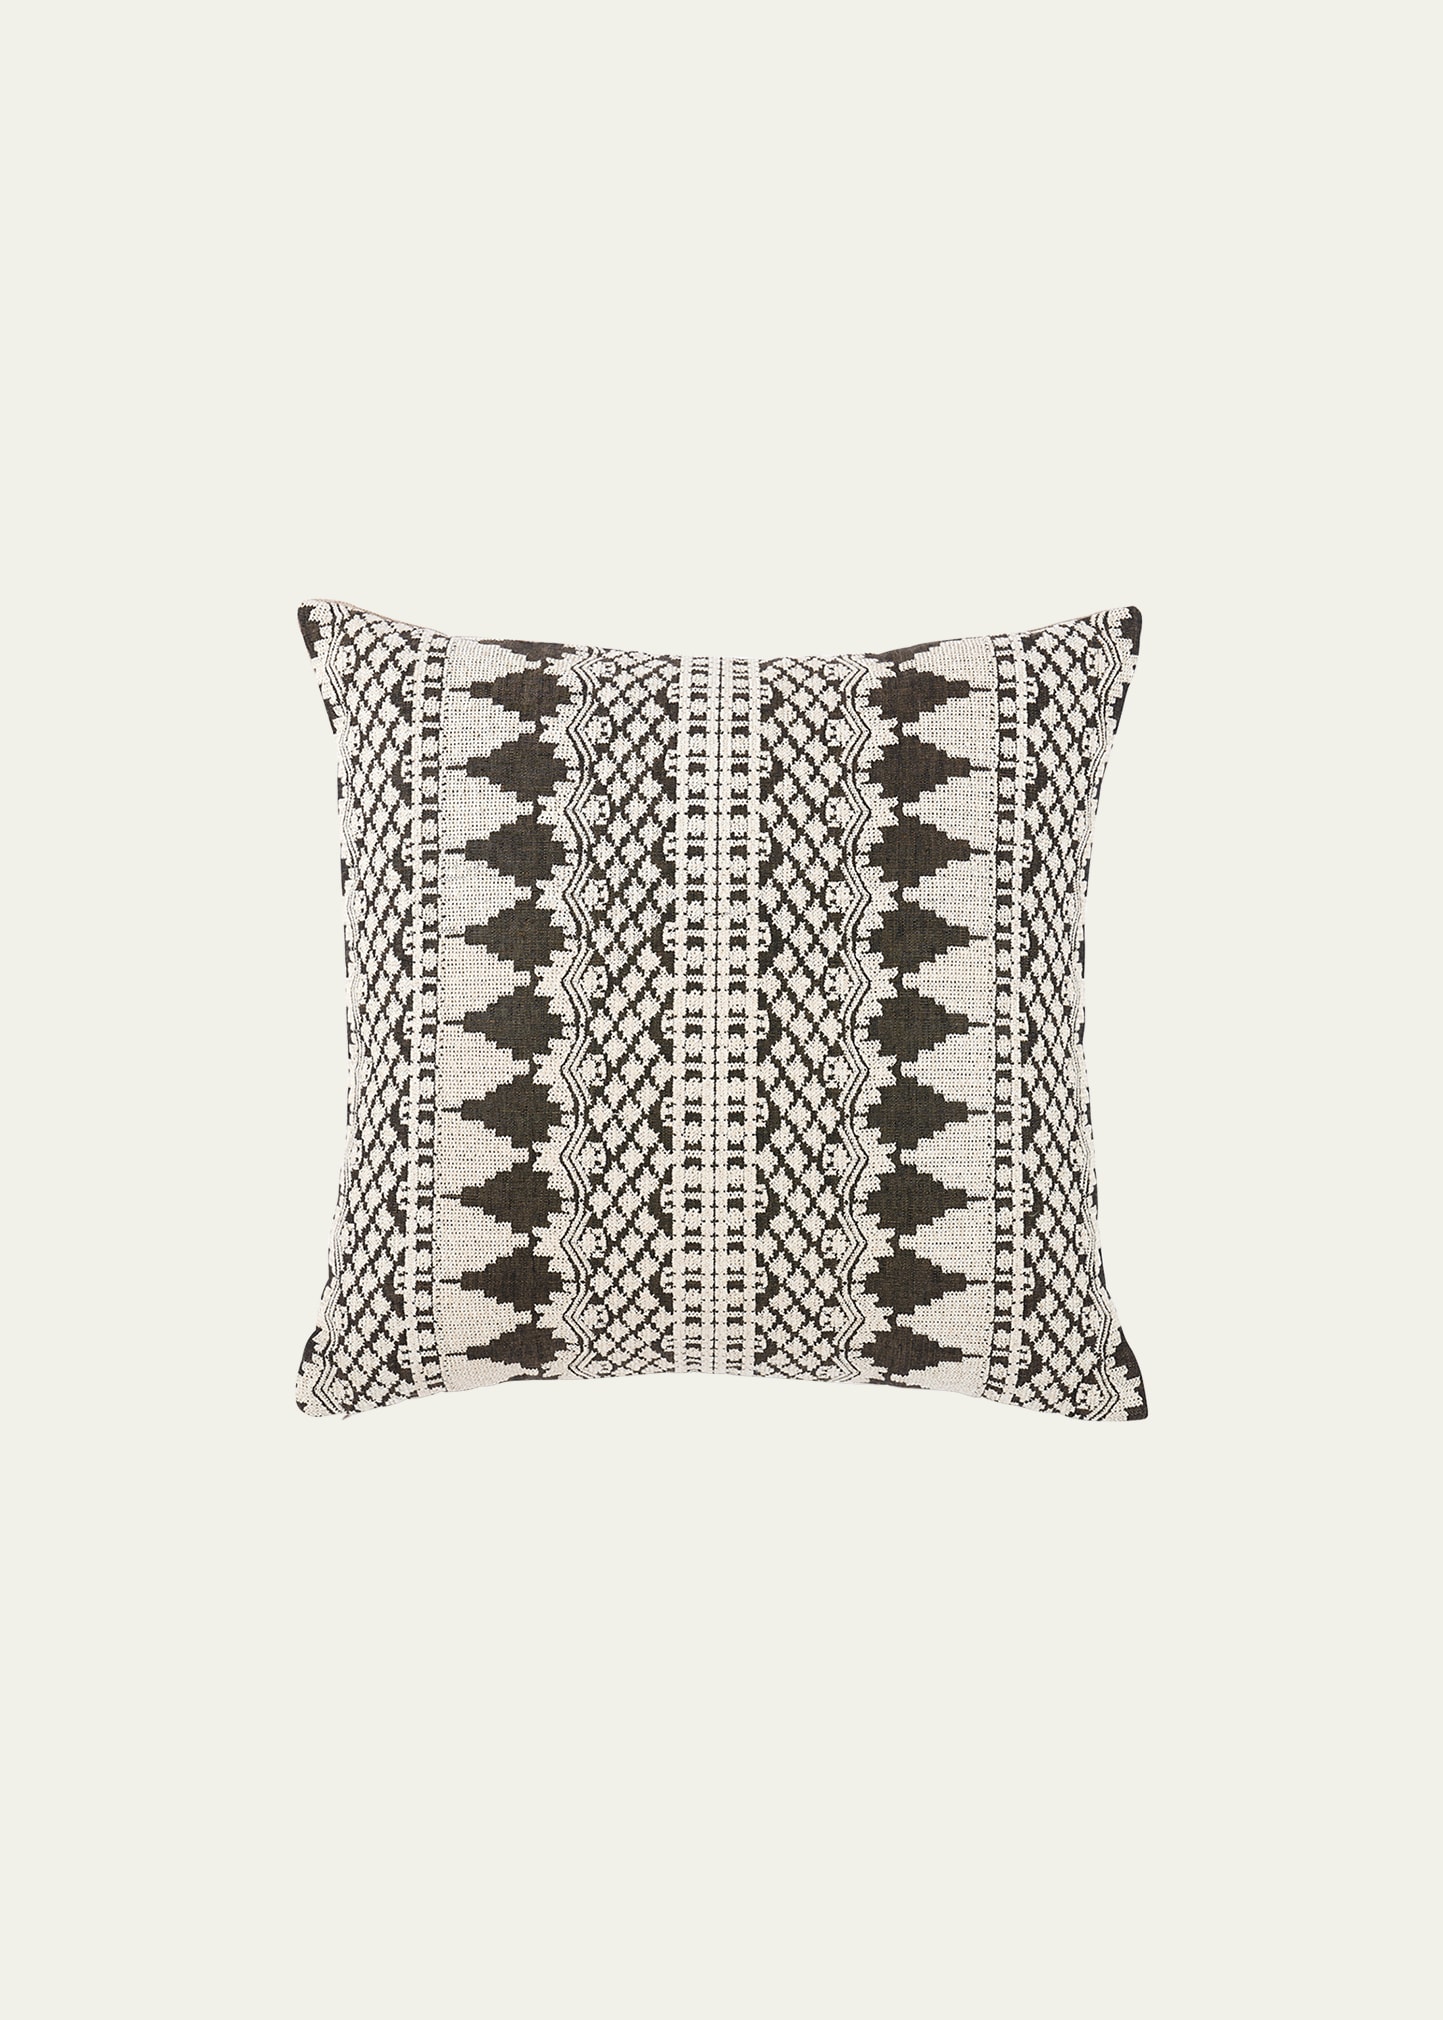 Wentworth Embroidered Pillow, 22"Sq.